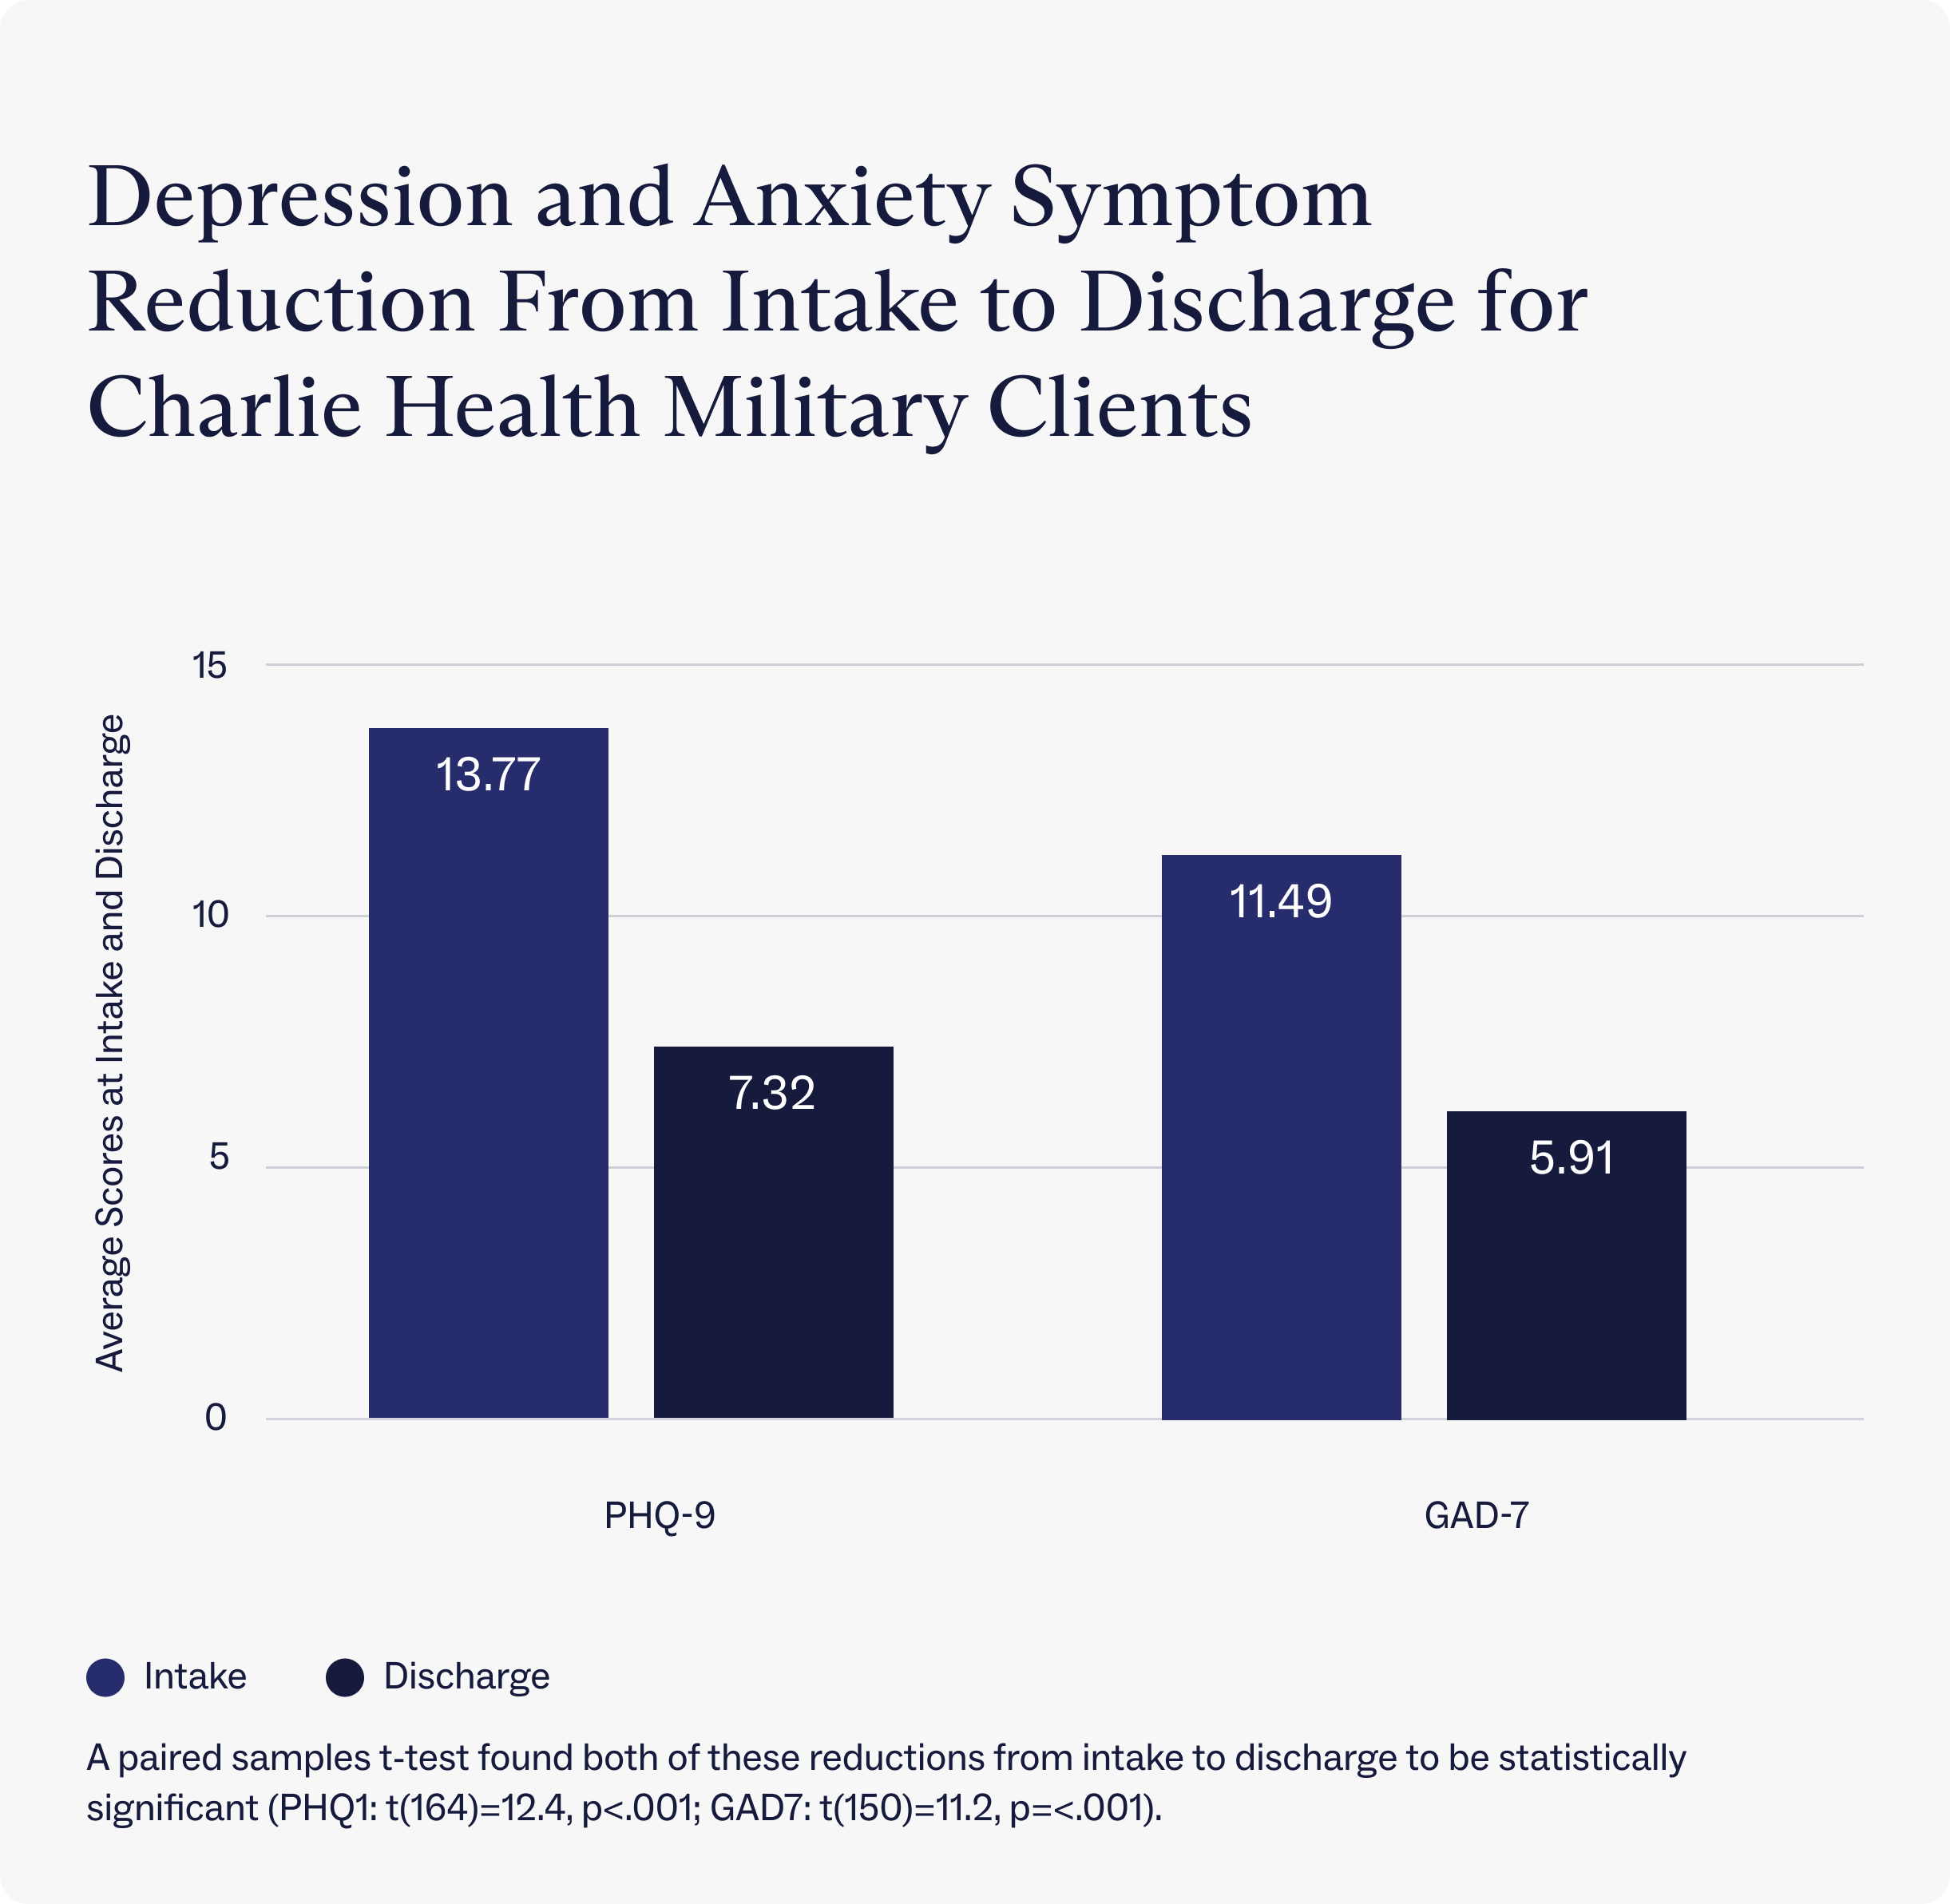 Depression and anxiety symptom reduction from intake to discharge for Charlie Health military clientss